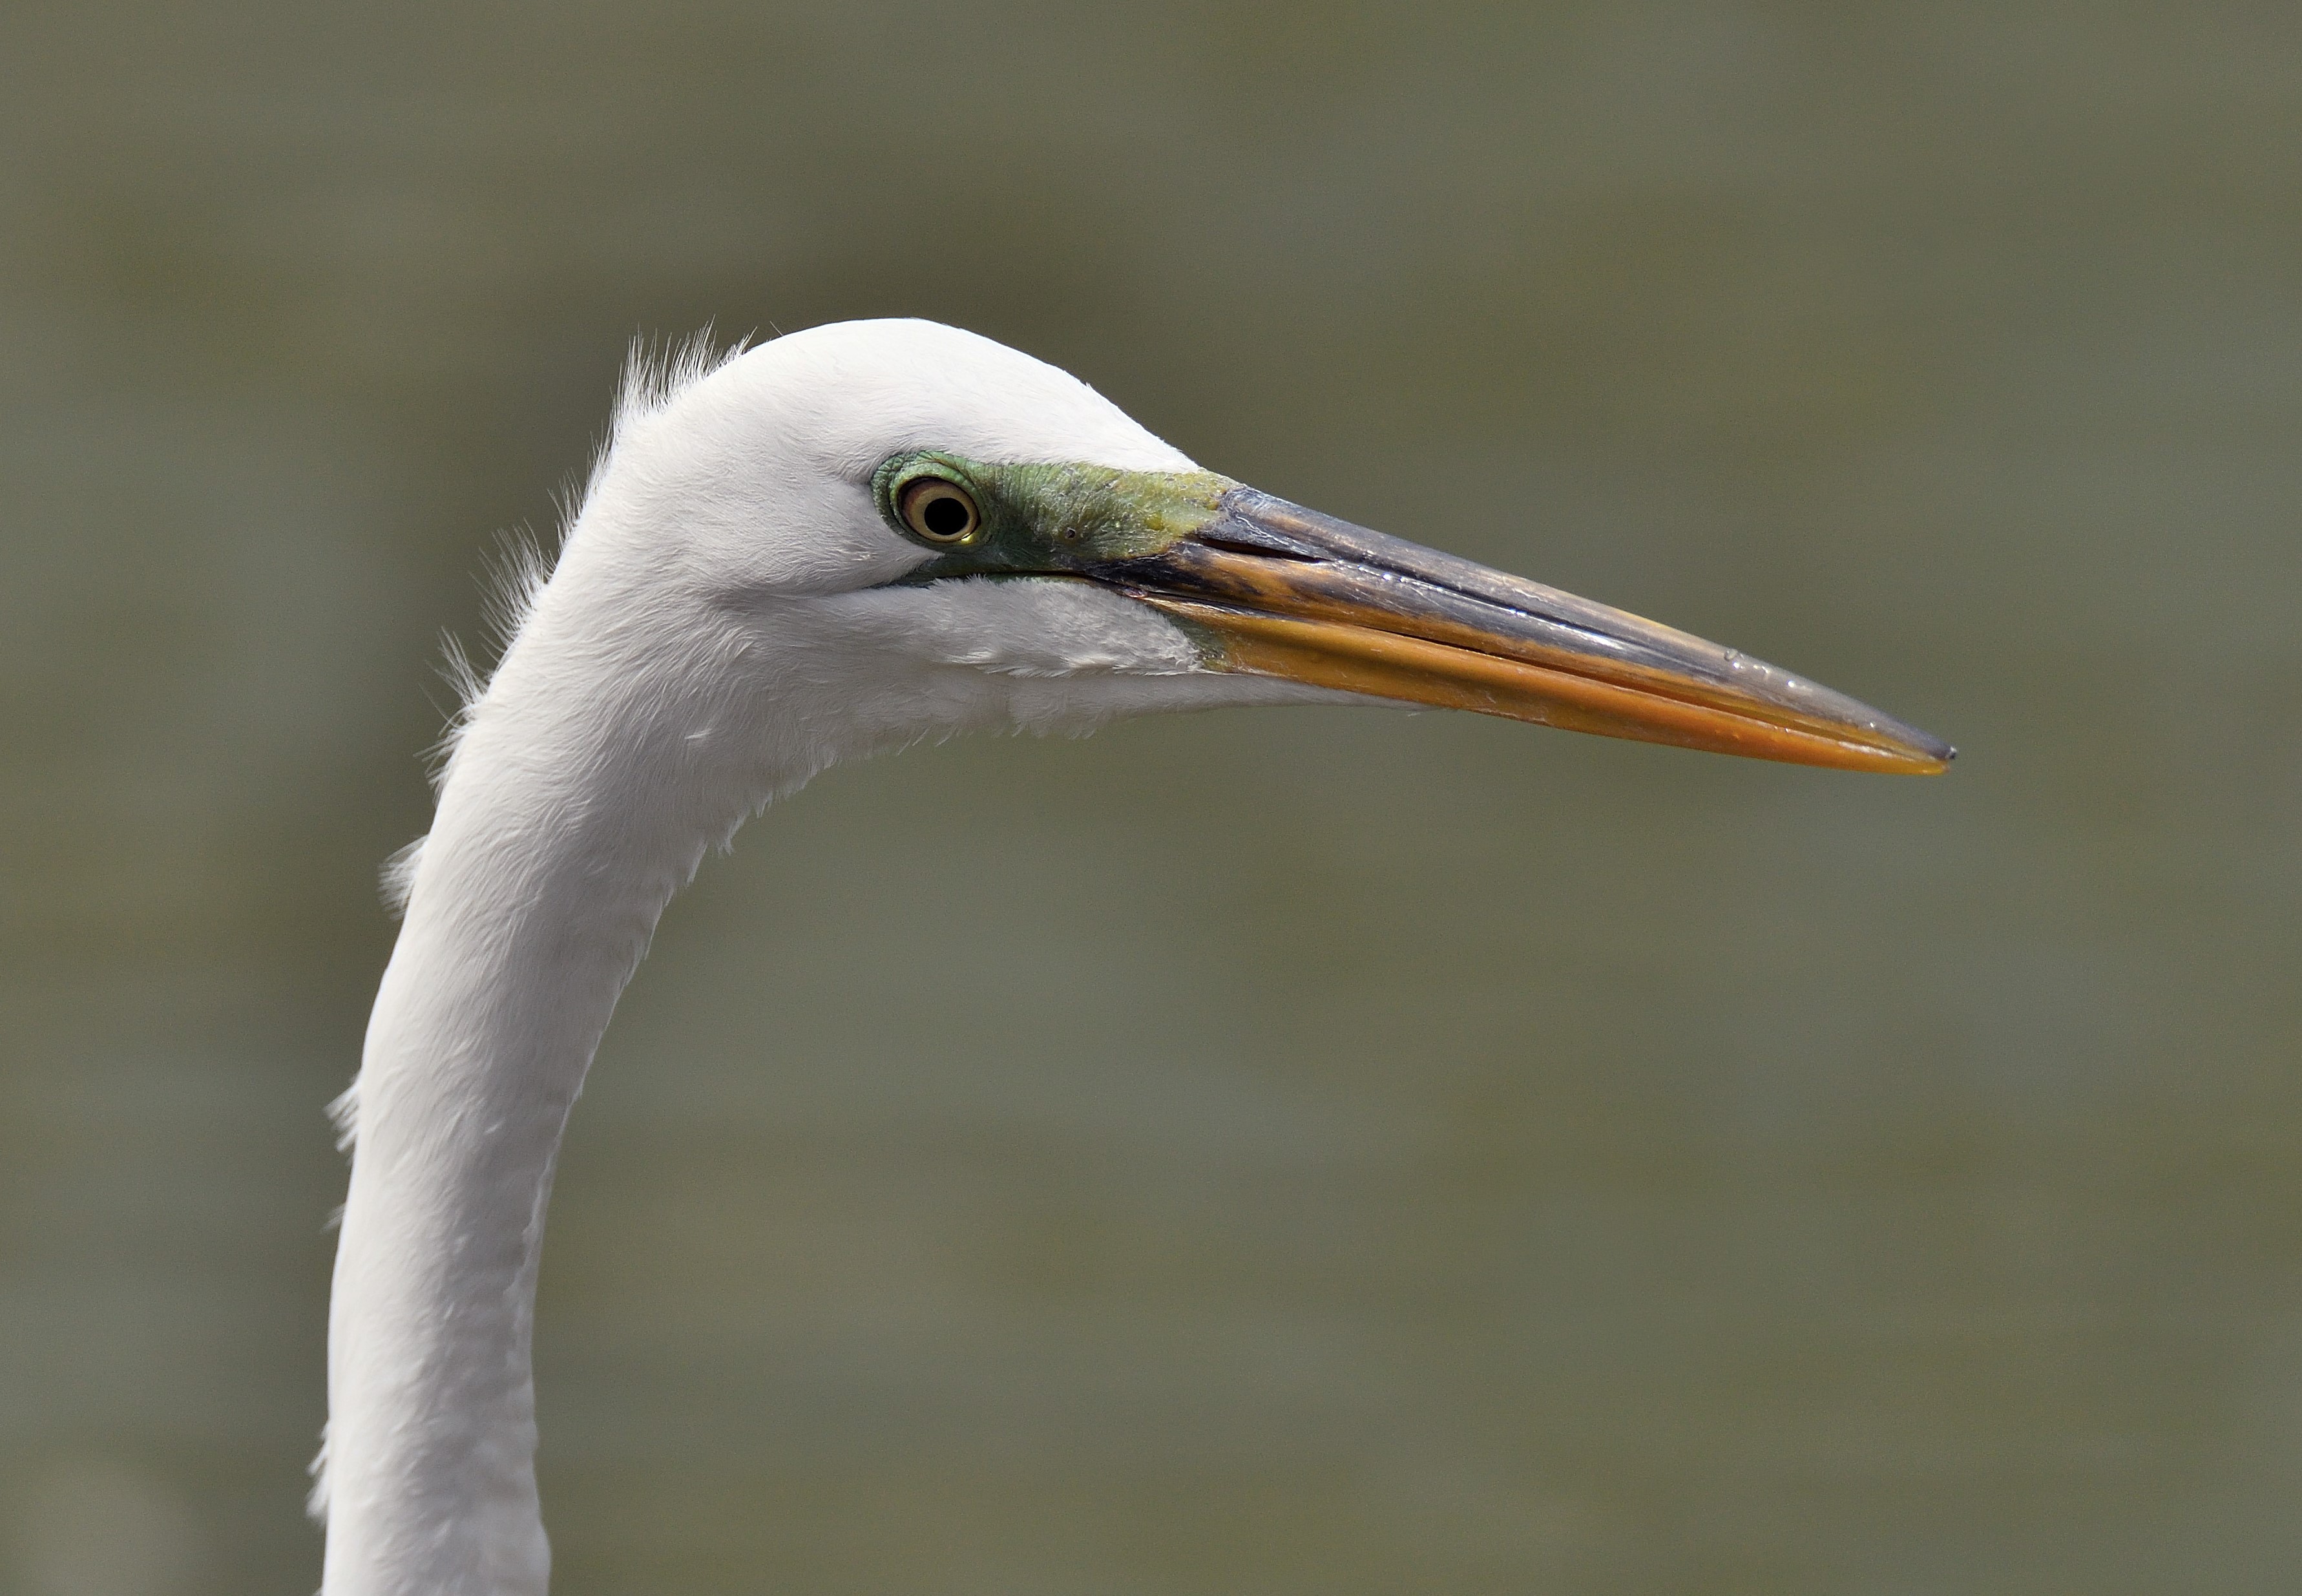 Locally nesting waders like this Great Egret, as well as Black-crowned Night-Heron and Great Blue Heron, sometimes visit Morningside Park’s lake. Photo: Terence Zahner